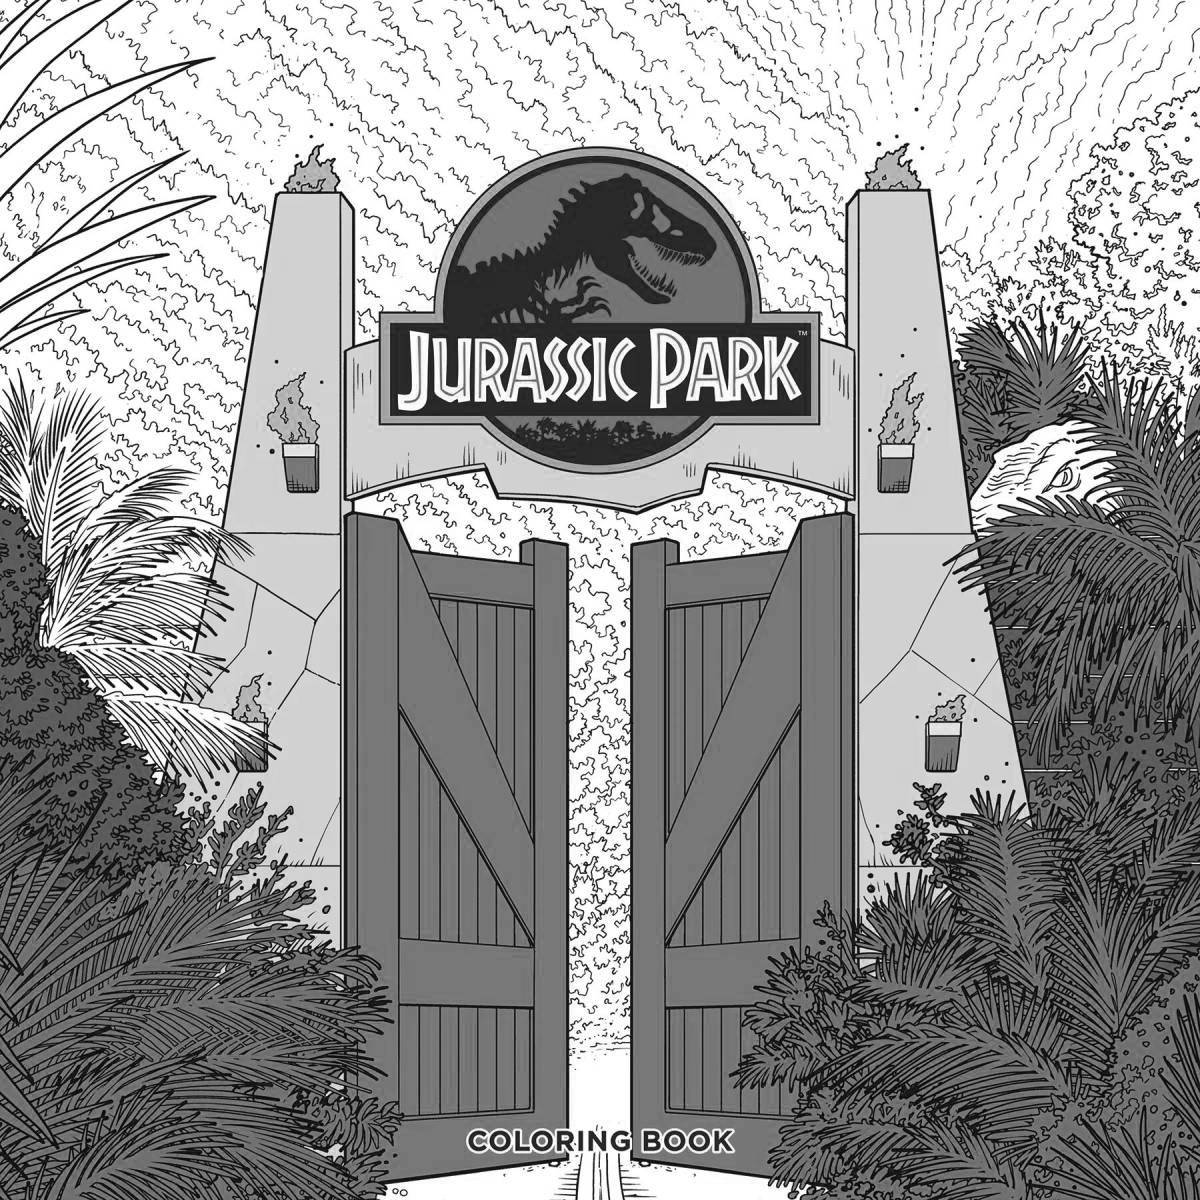 Radiant jurassic park coloring page